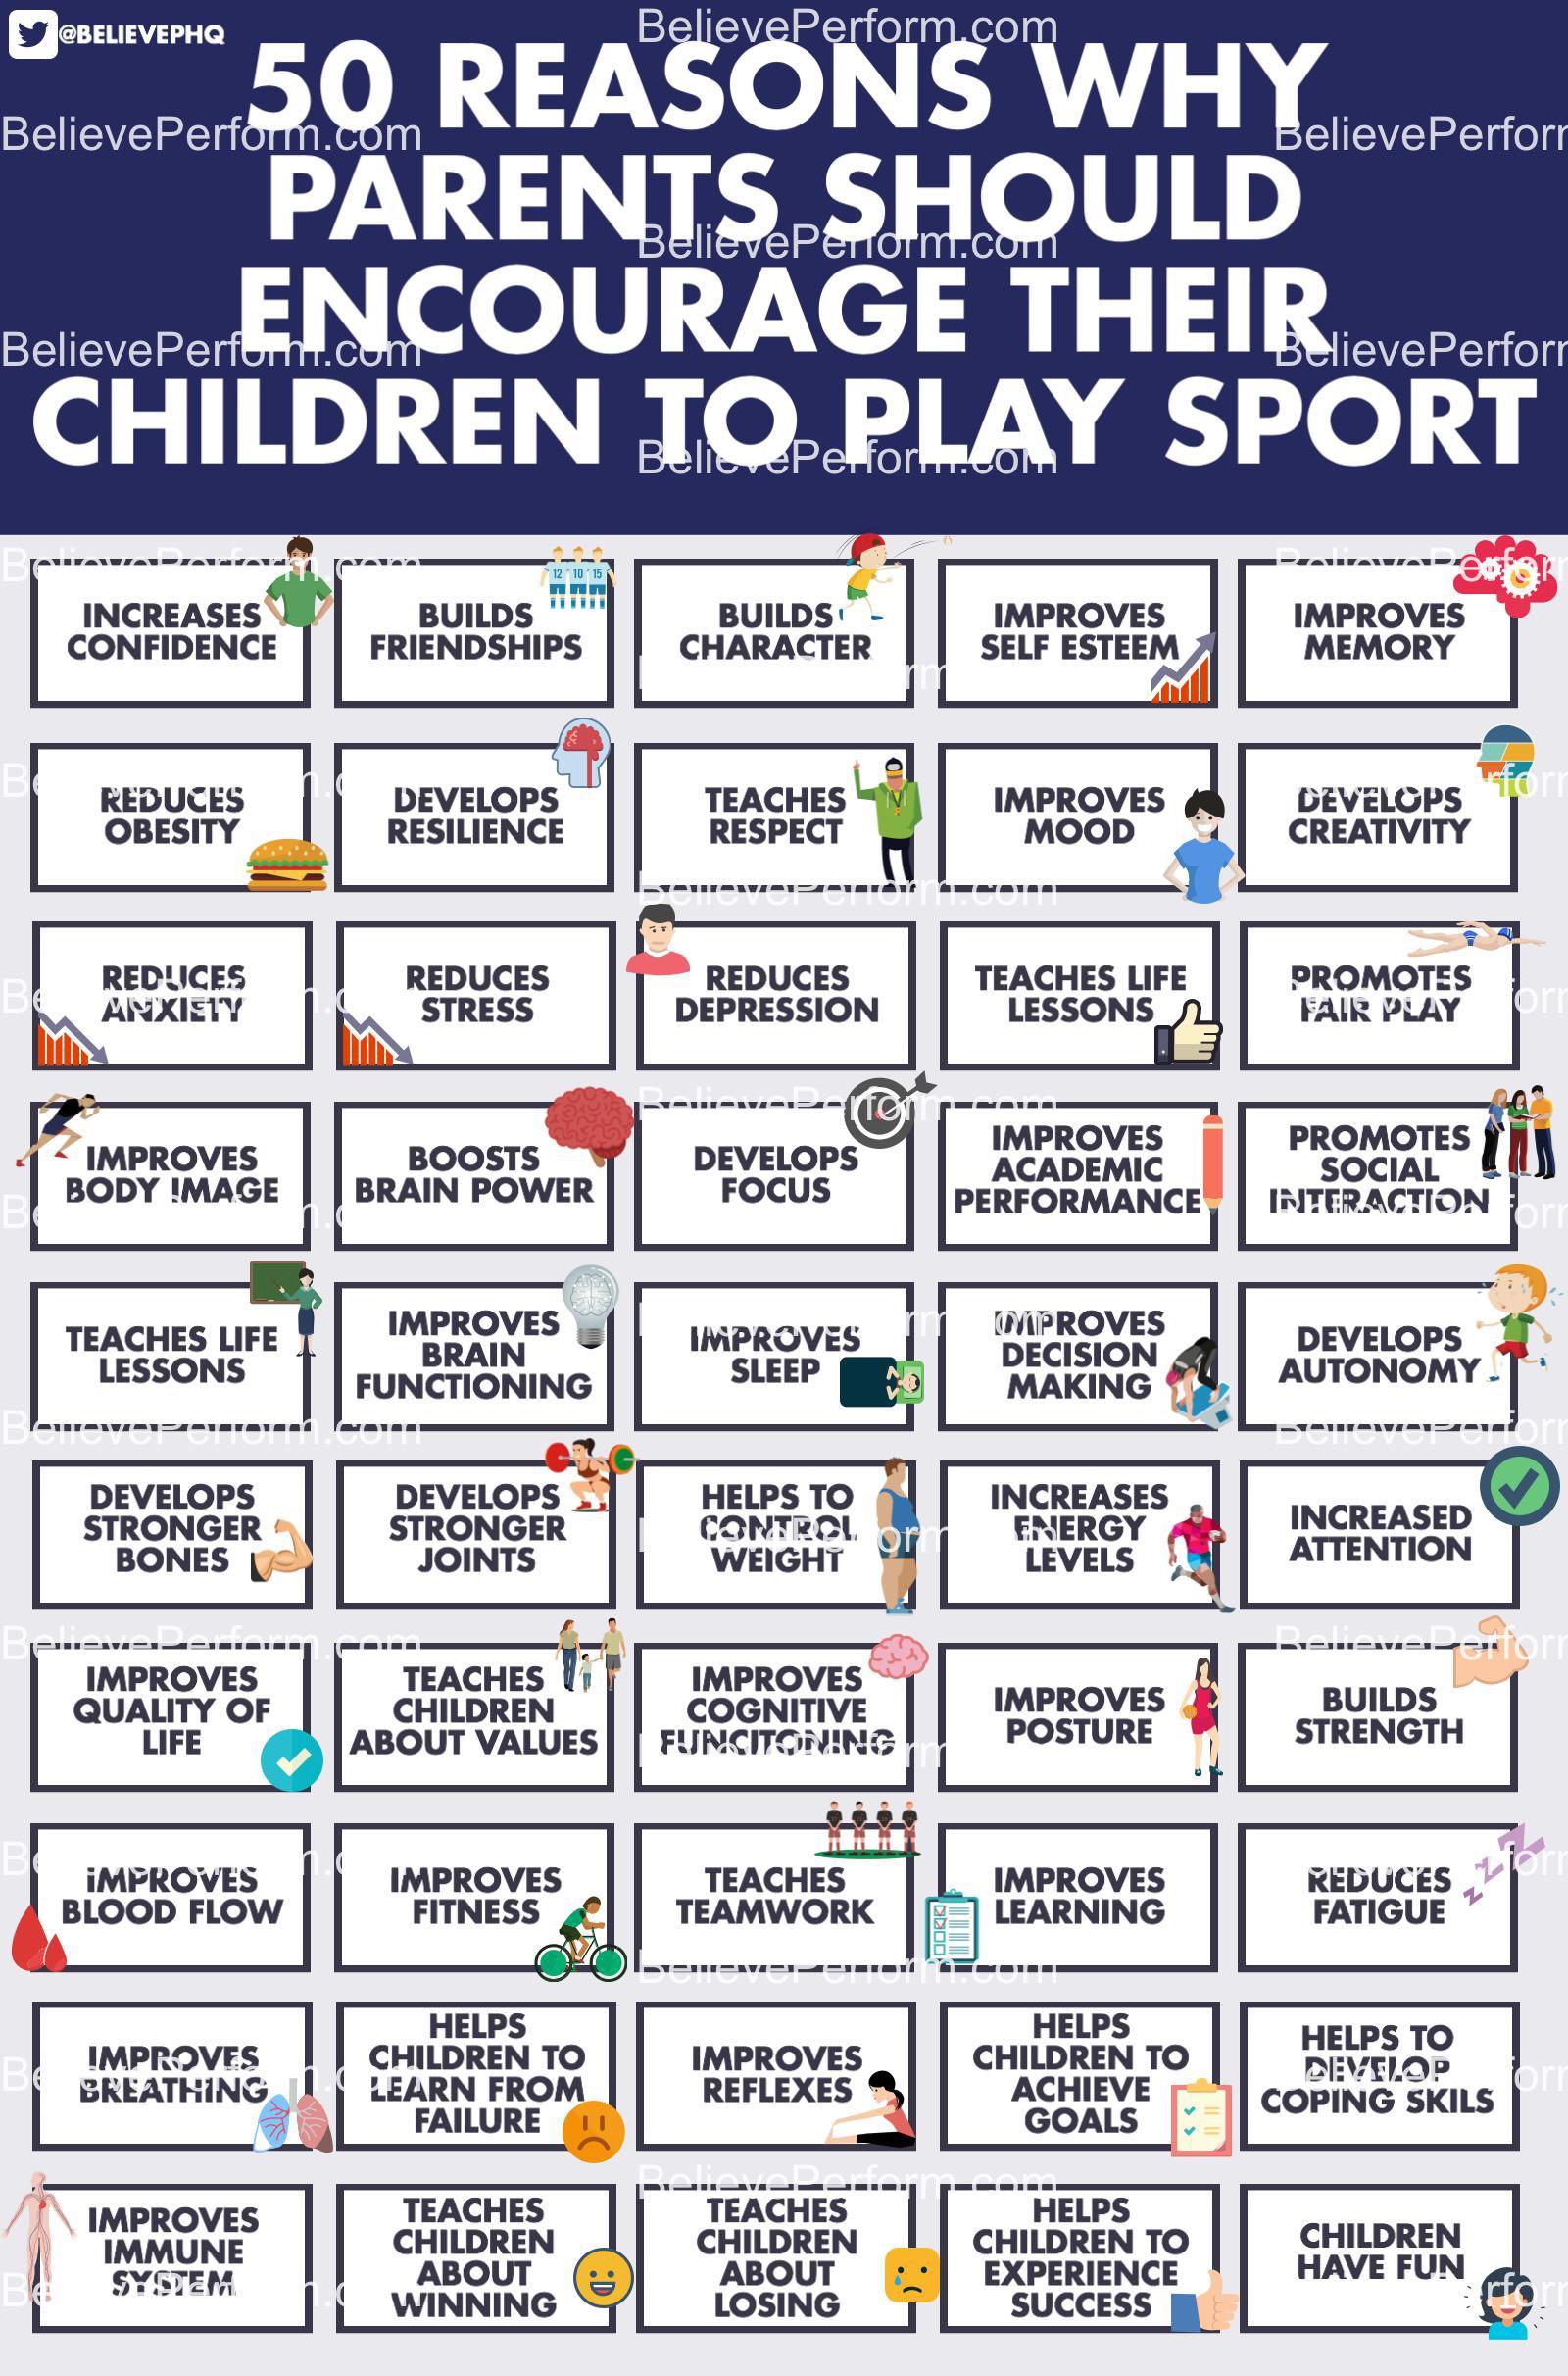 https://members.believeperform.com/wp-content/uploads/2019/09/50-reasons-why-parents-should-encourage-their-children-to-play-sport.jpeg